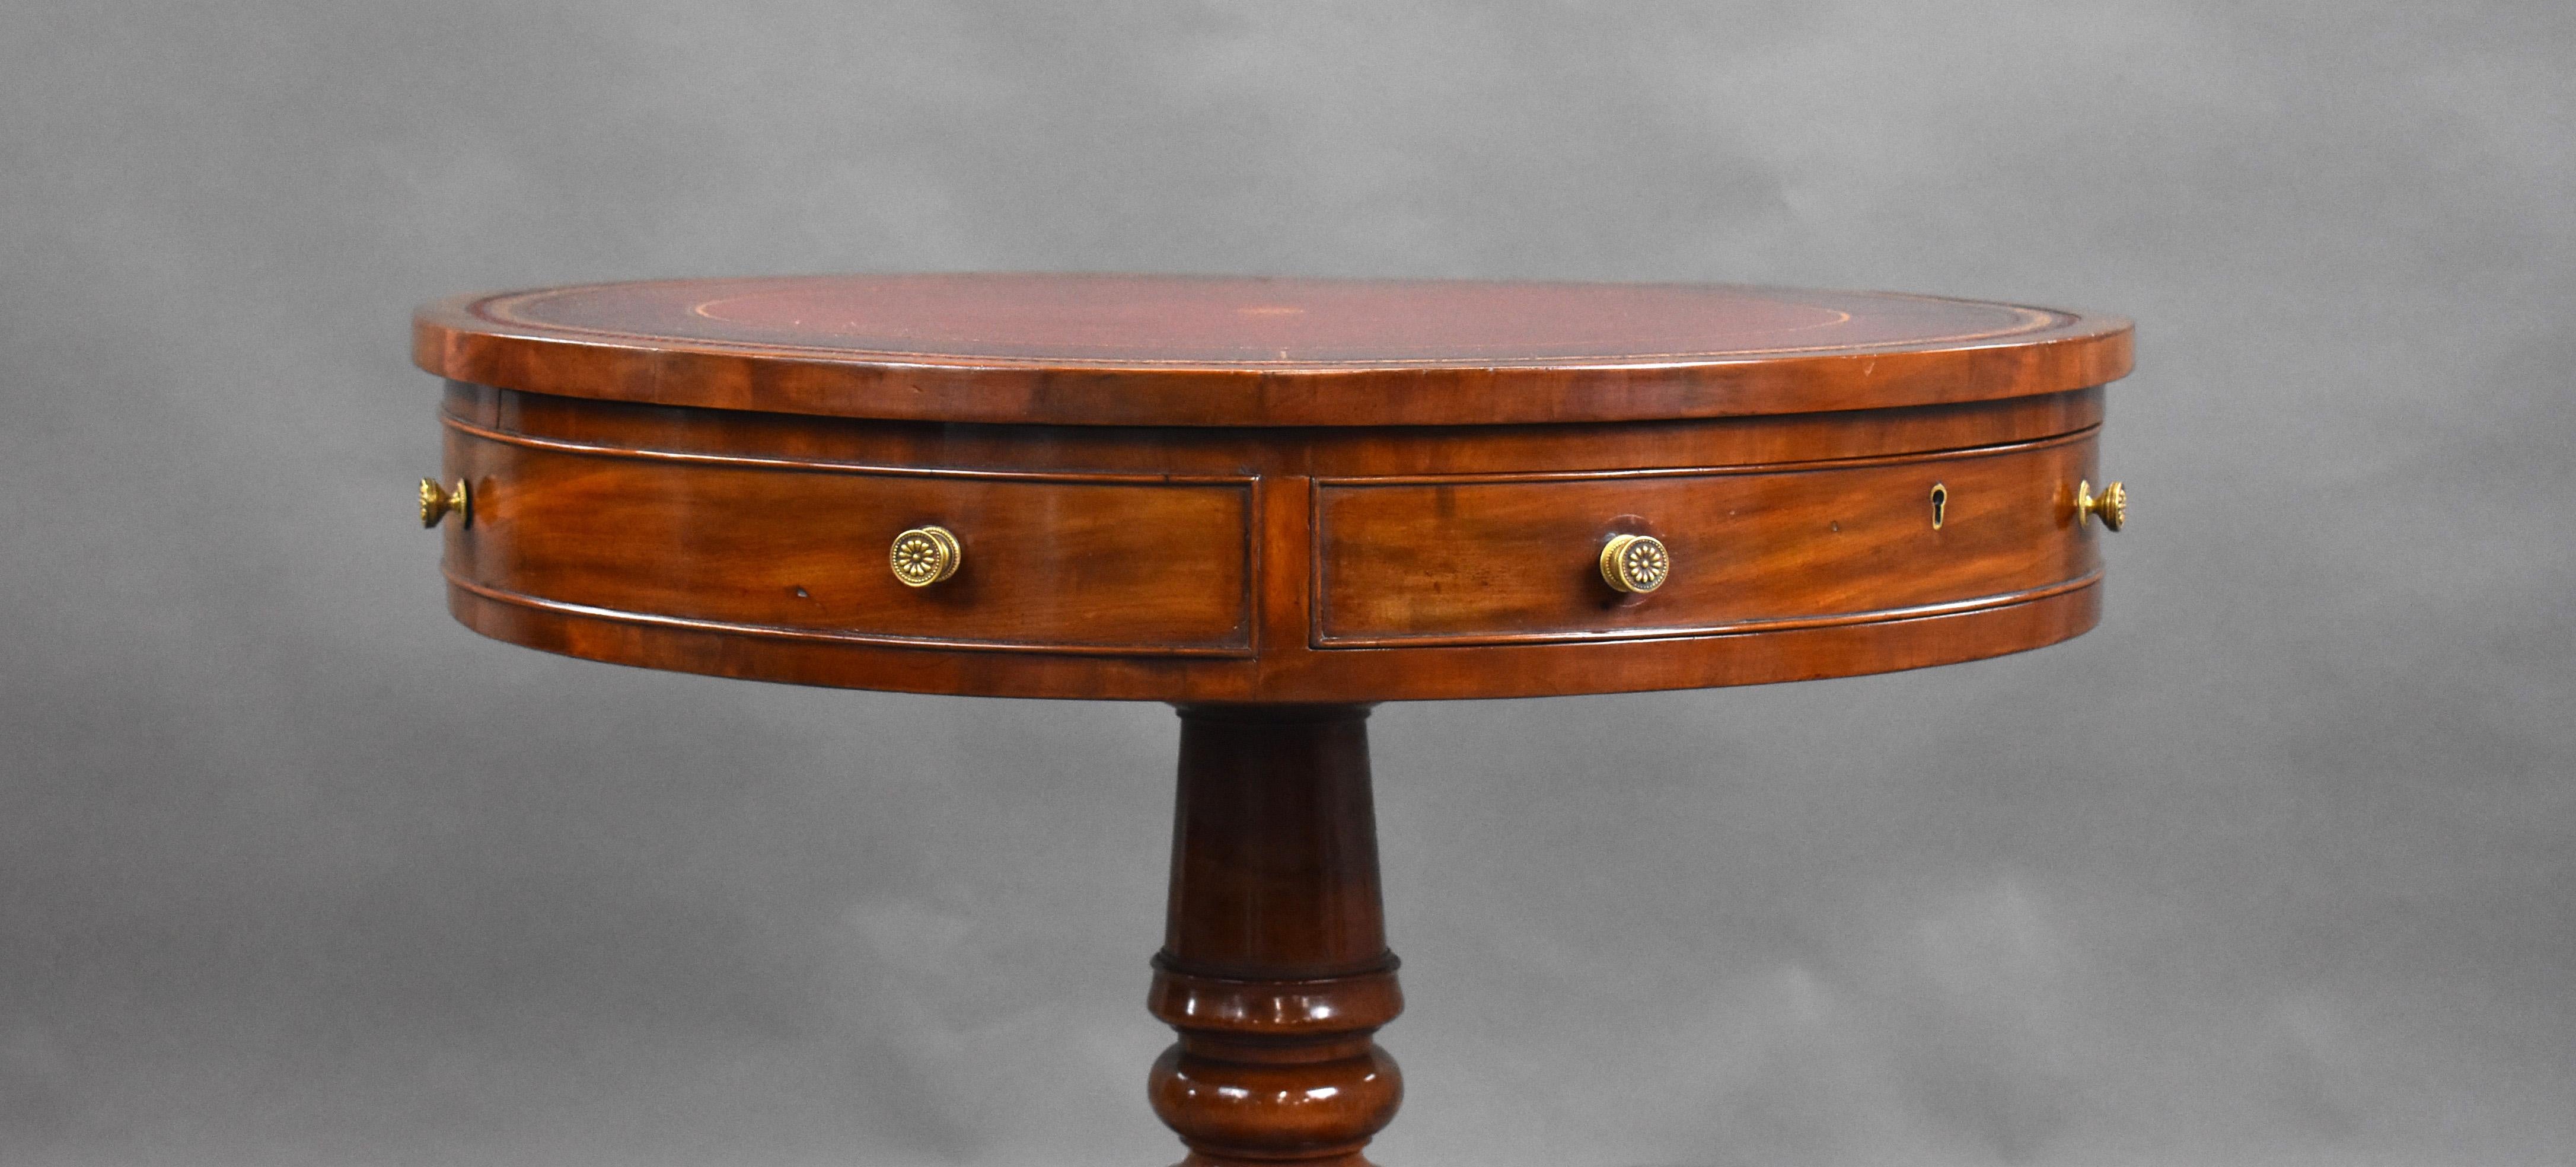 English Small Regency Mahogany Drum Table For Sale